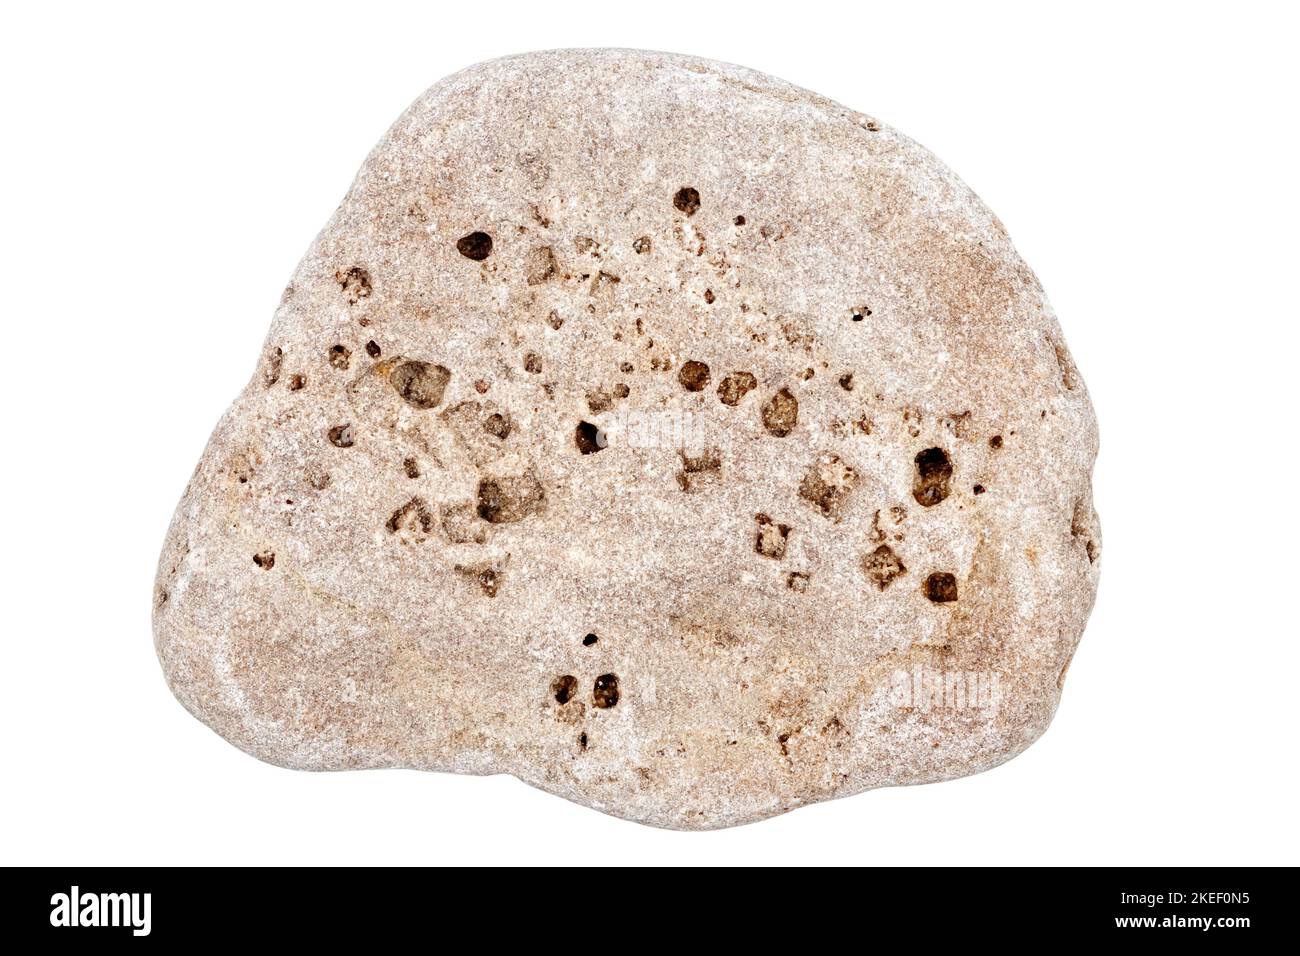 Top view of single beige pebble isolated on white background. Stock Photo